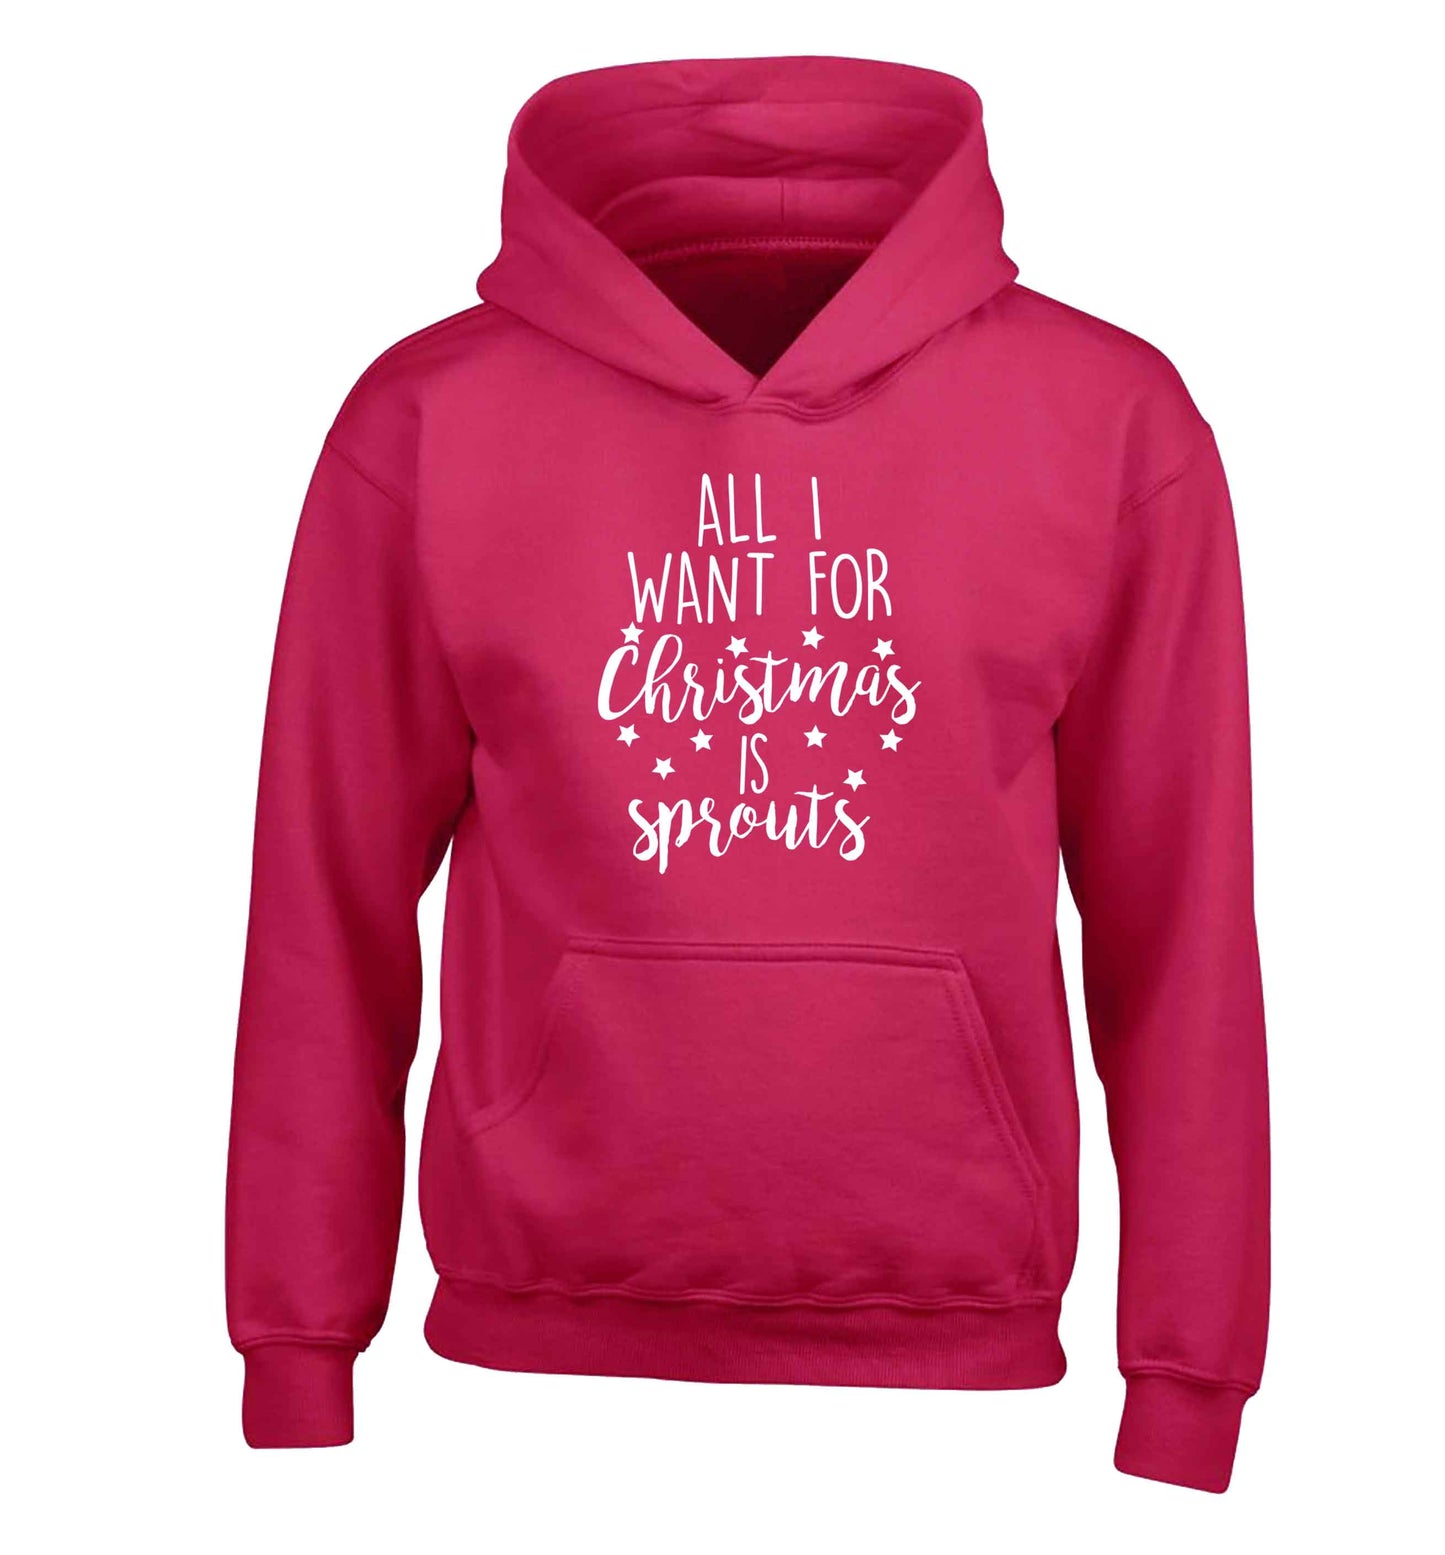 All I want for Christmas is sprouts children's pink hoodie 12-13 Years